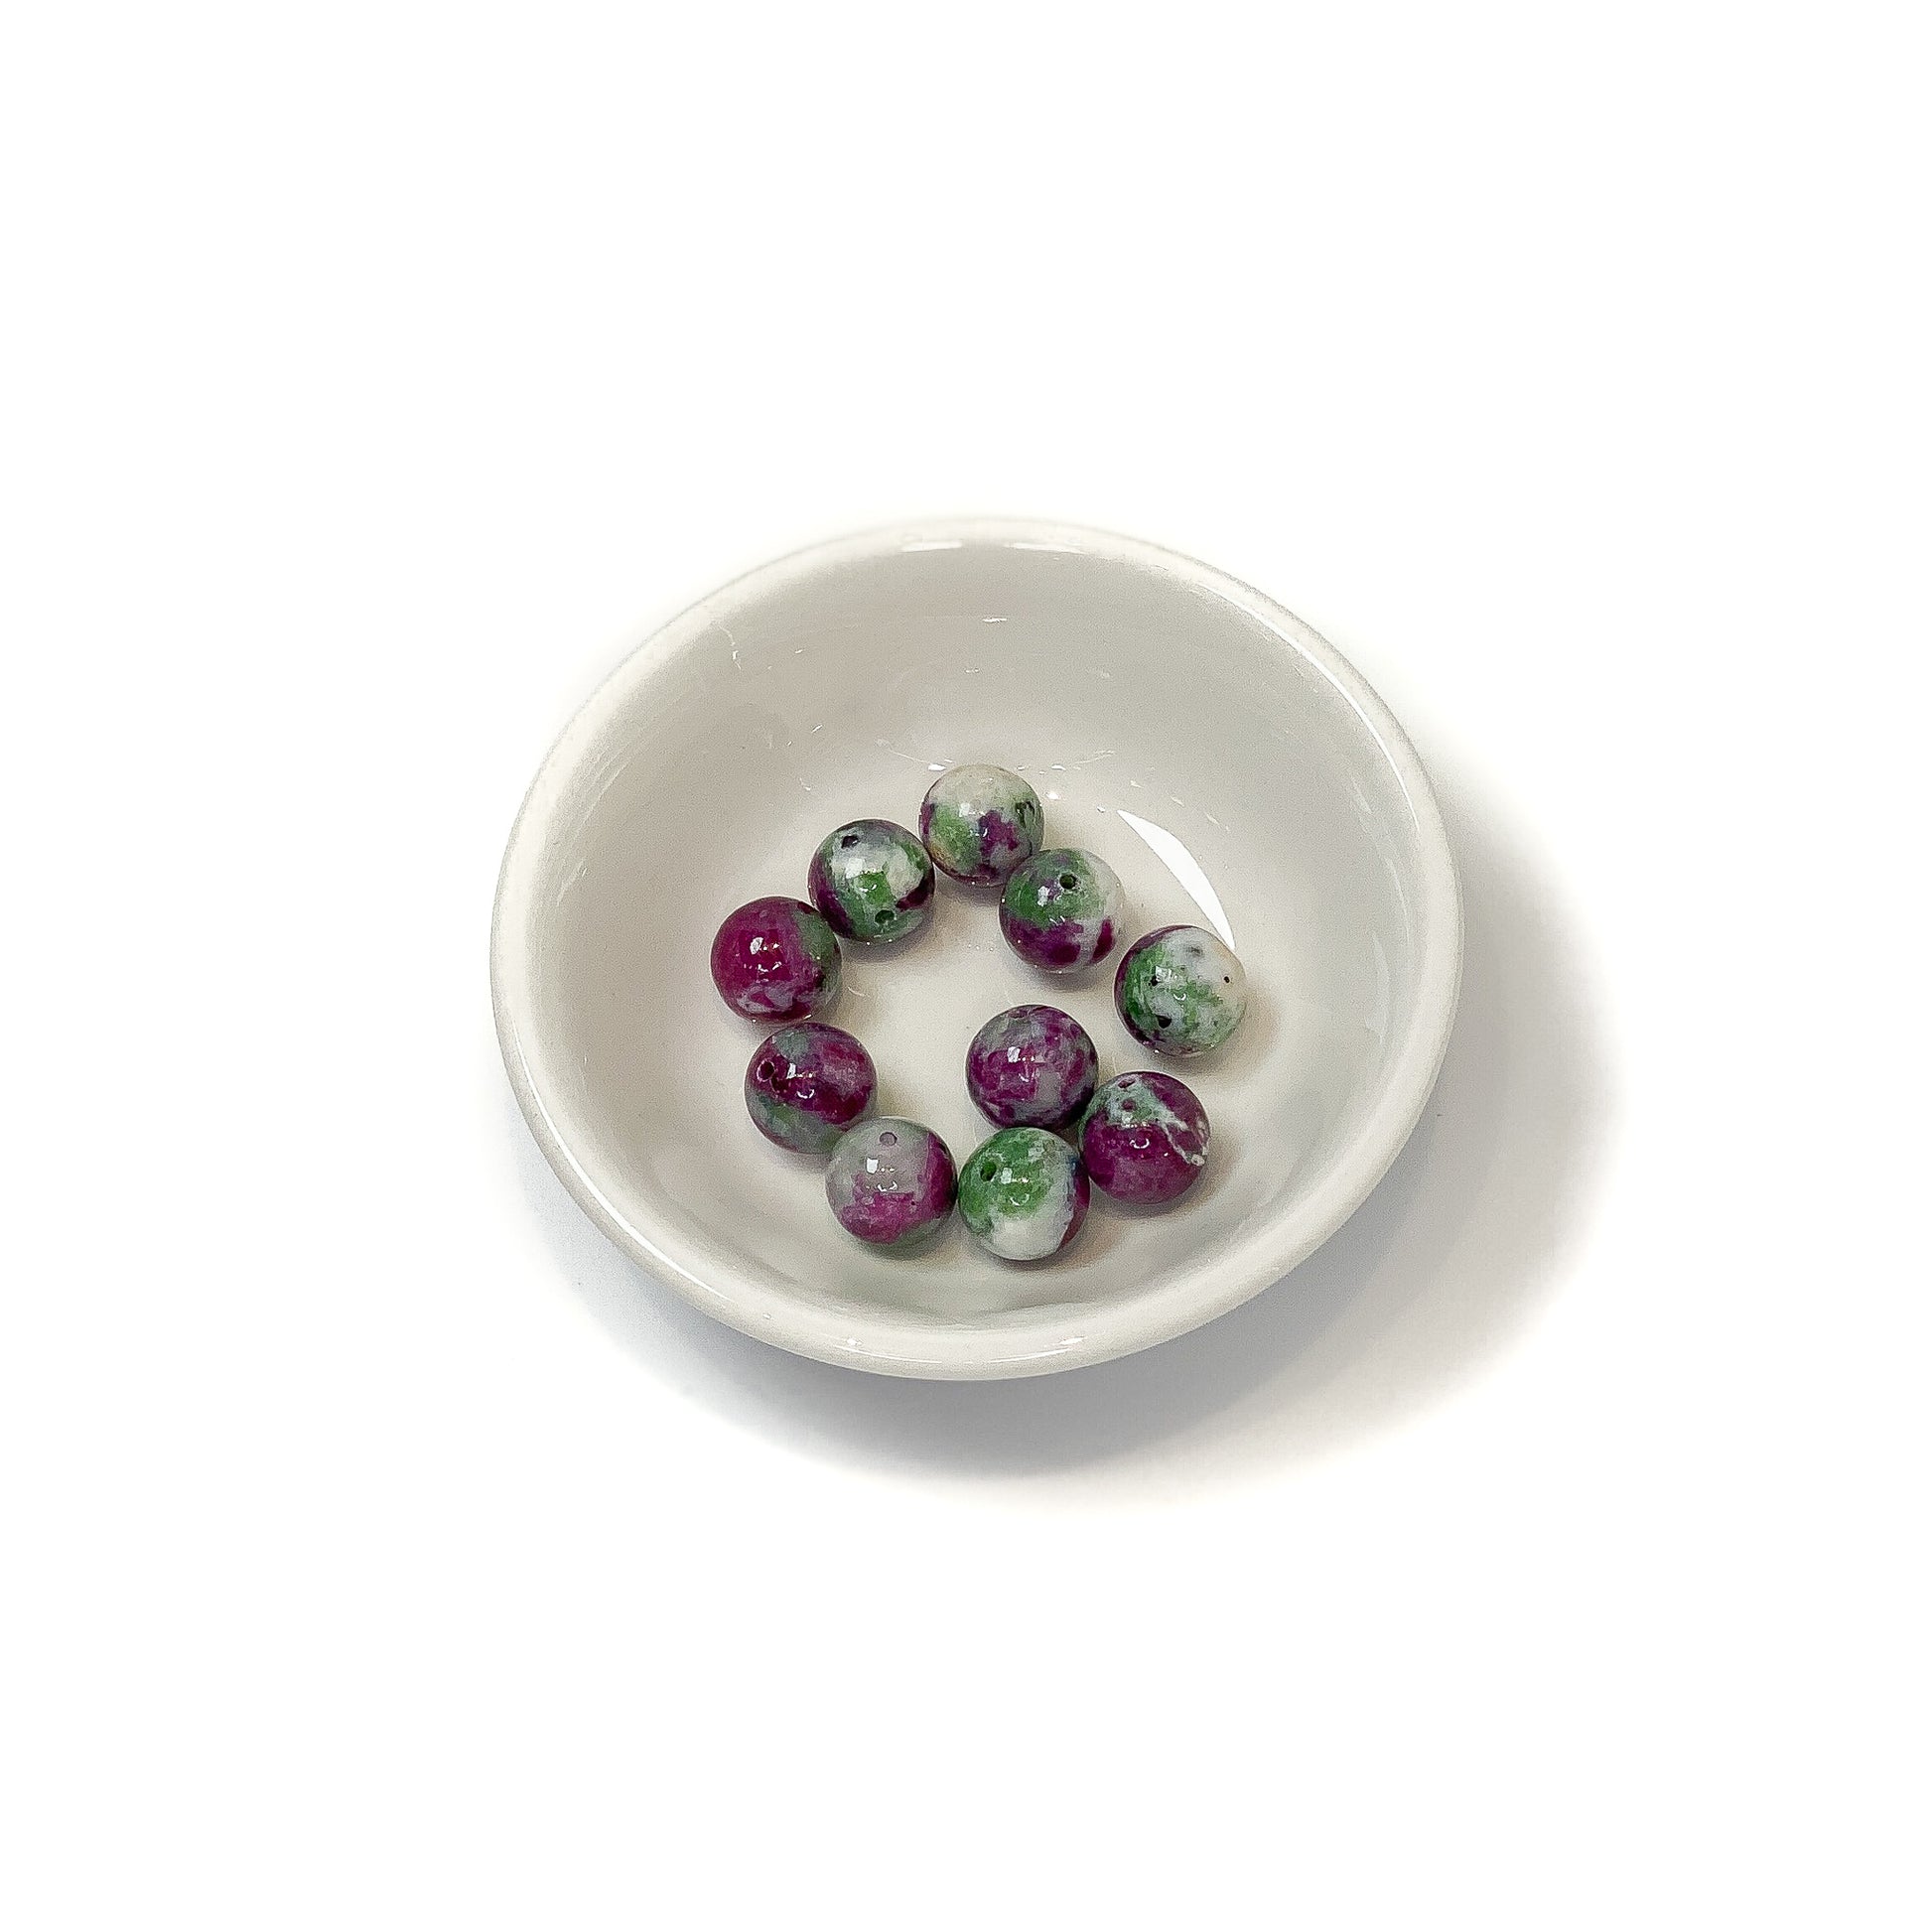 Ruby in Zoisite 10.5mm Round Bead - 1 pc.